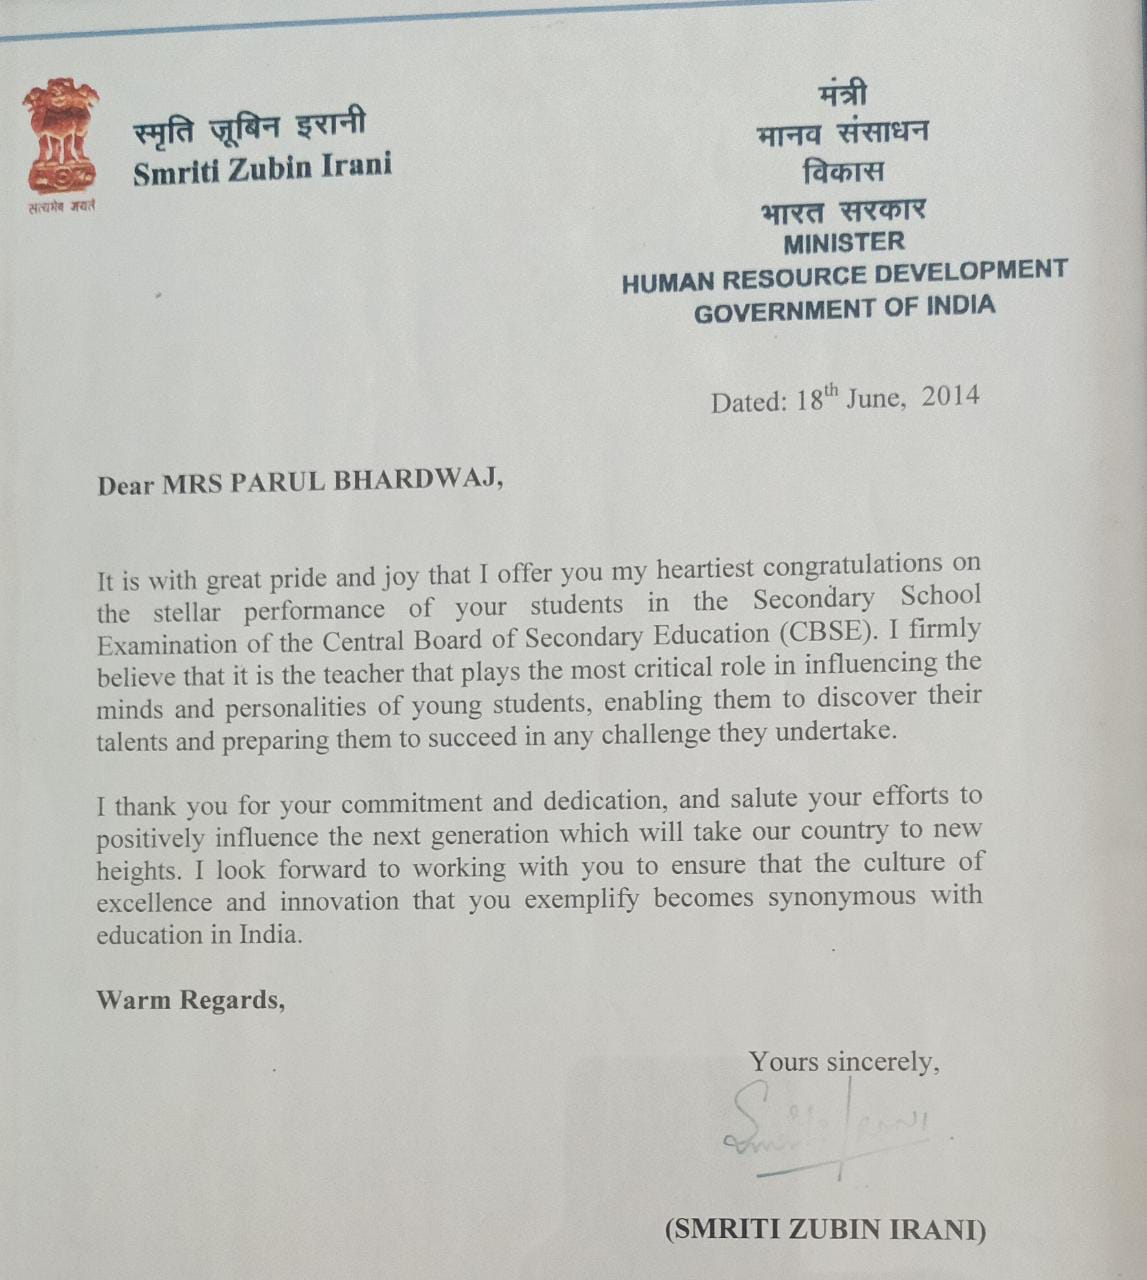 Letter of Appreciation from Minister Human Resource Development Govt. of India